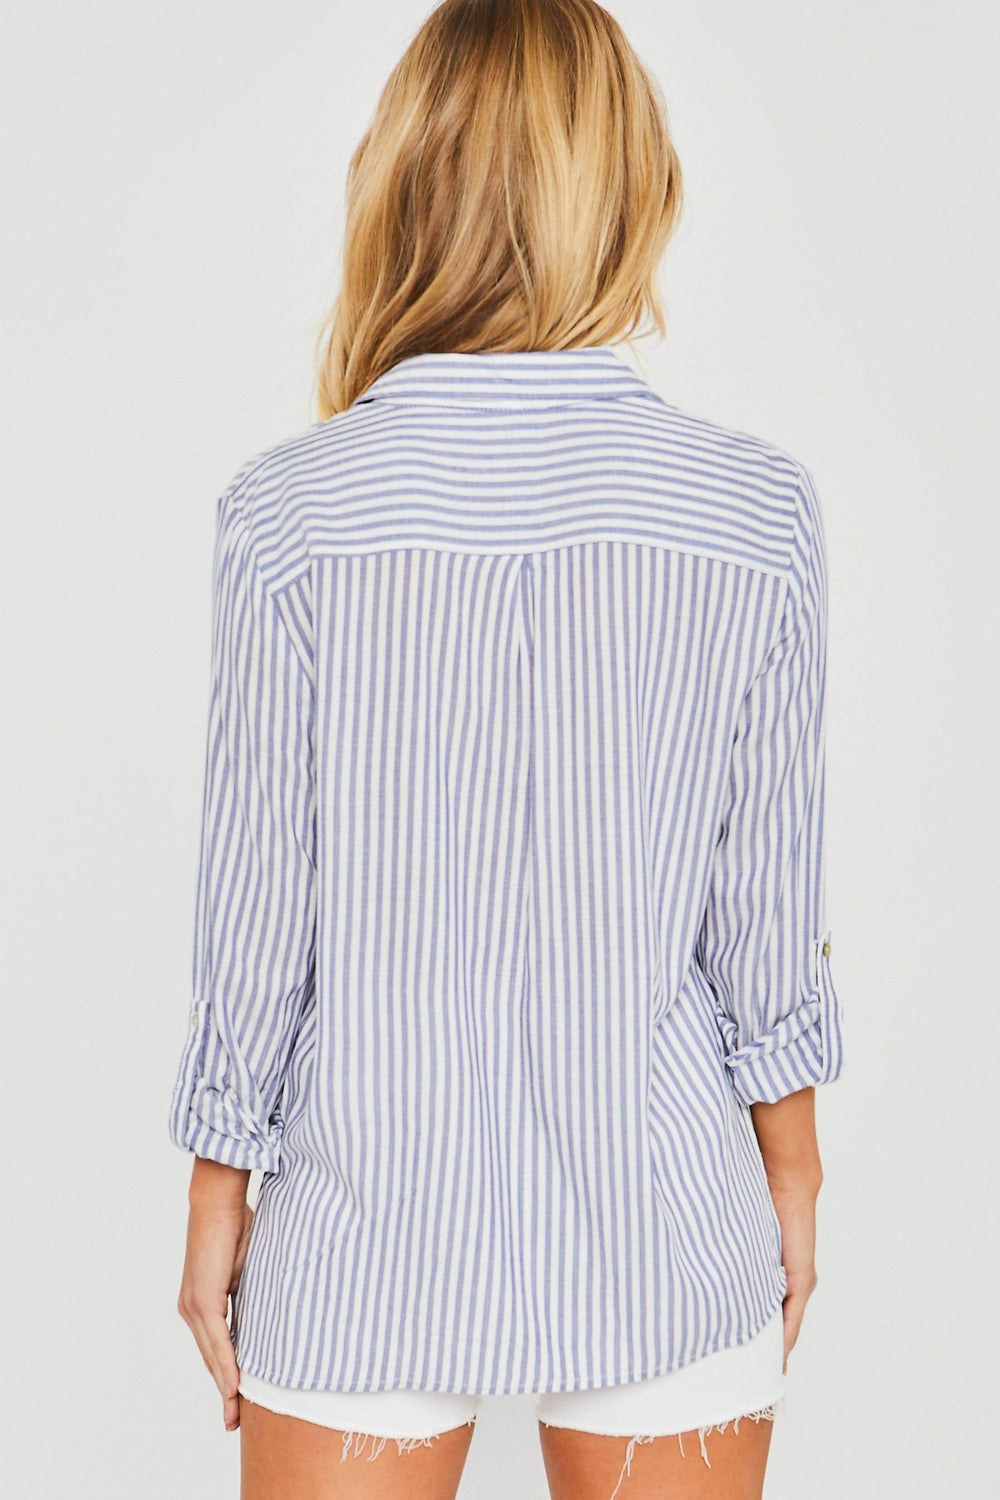 Poppy Striped Button-Up - Blue/White - Inspired Eye Boutique